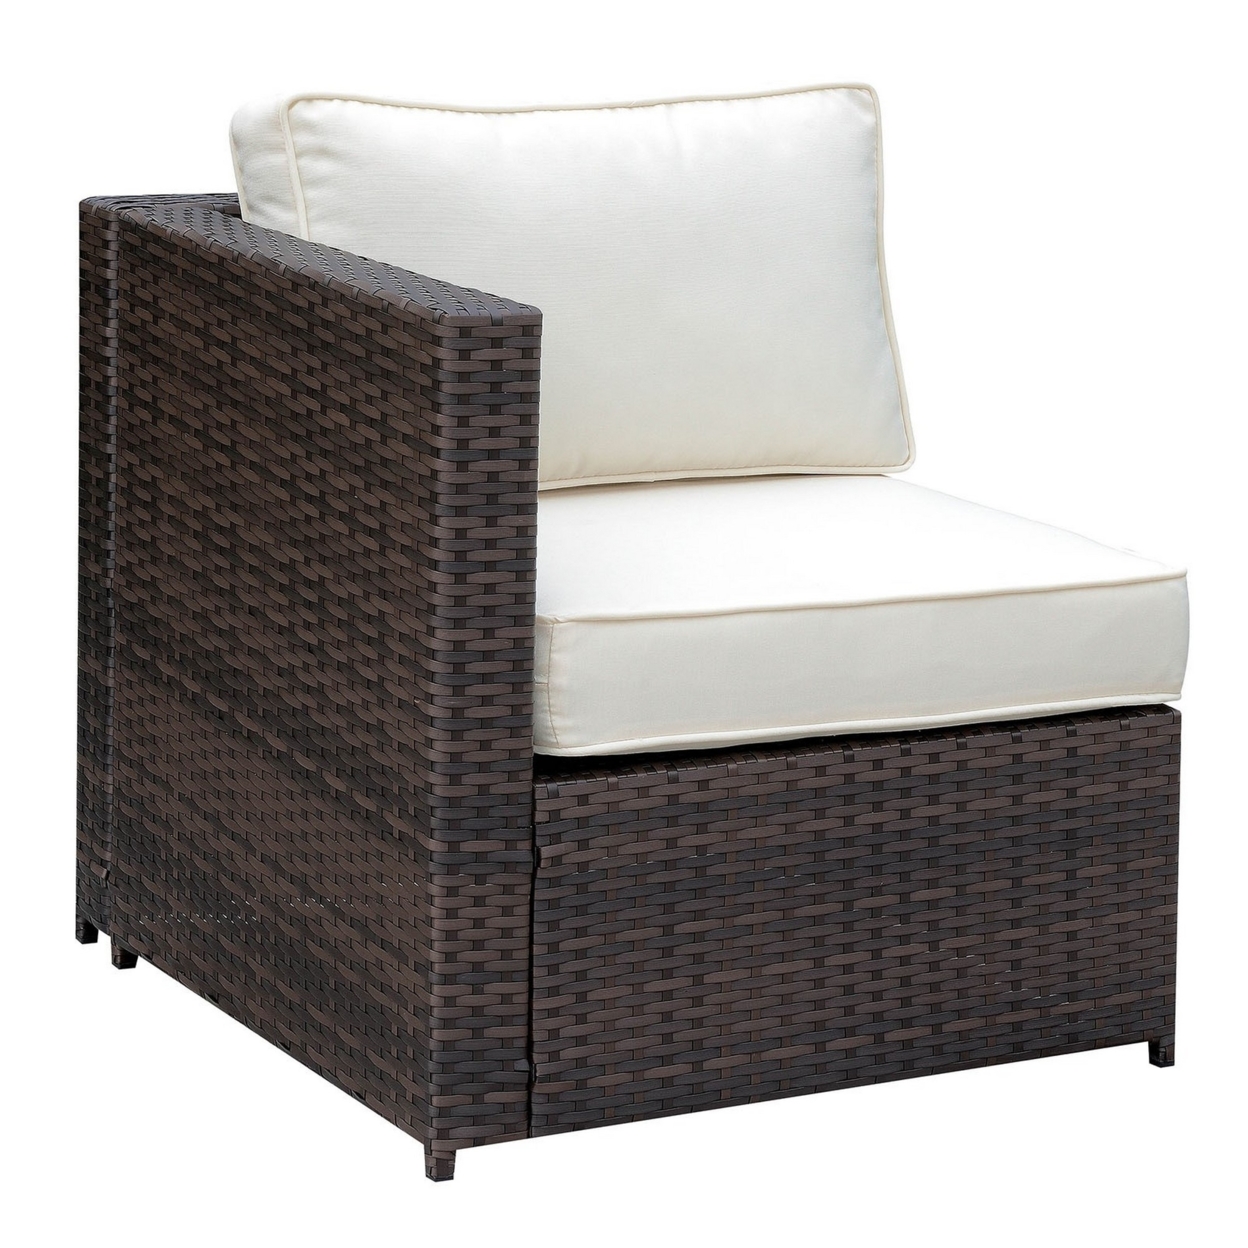 Faux Rattan Right Arm Chair With Seat & Back Cushions, Brown And Ivory- Saltoro Sherpi